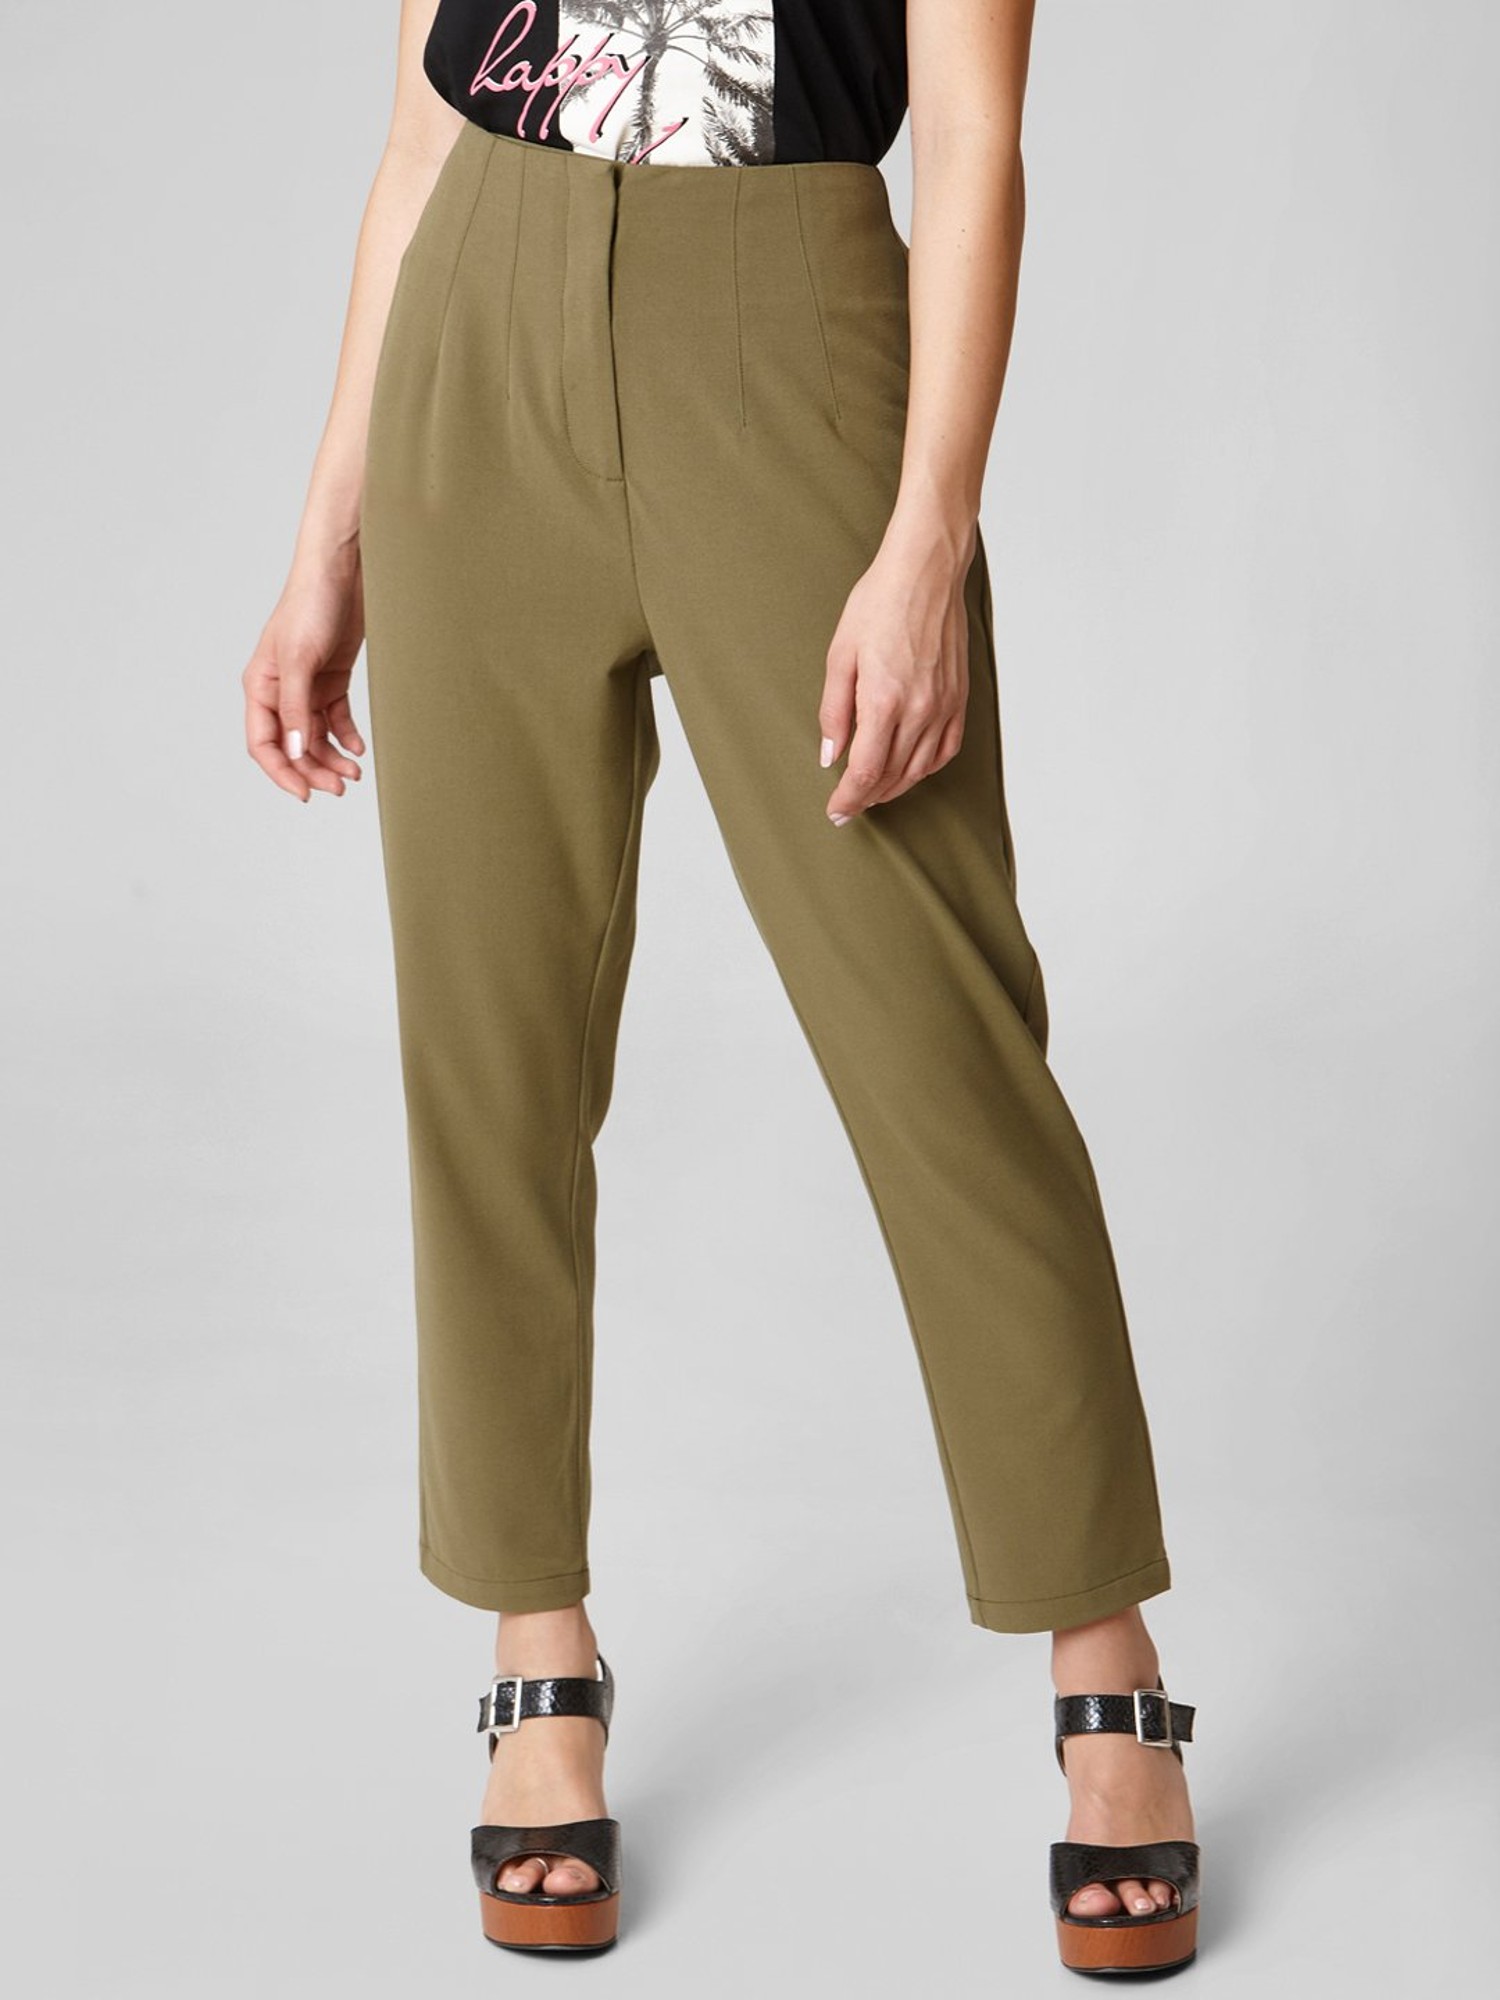 Kate Sylvester Womens Trousers  Cord Trouser Olive  Adarshitibhopal